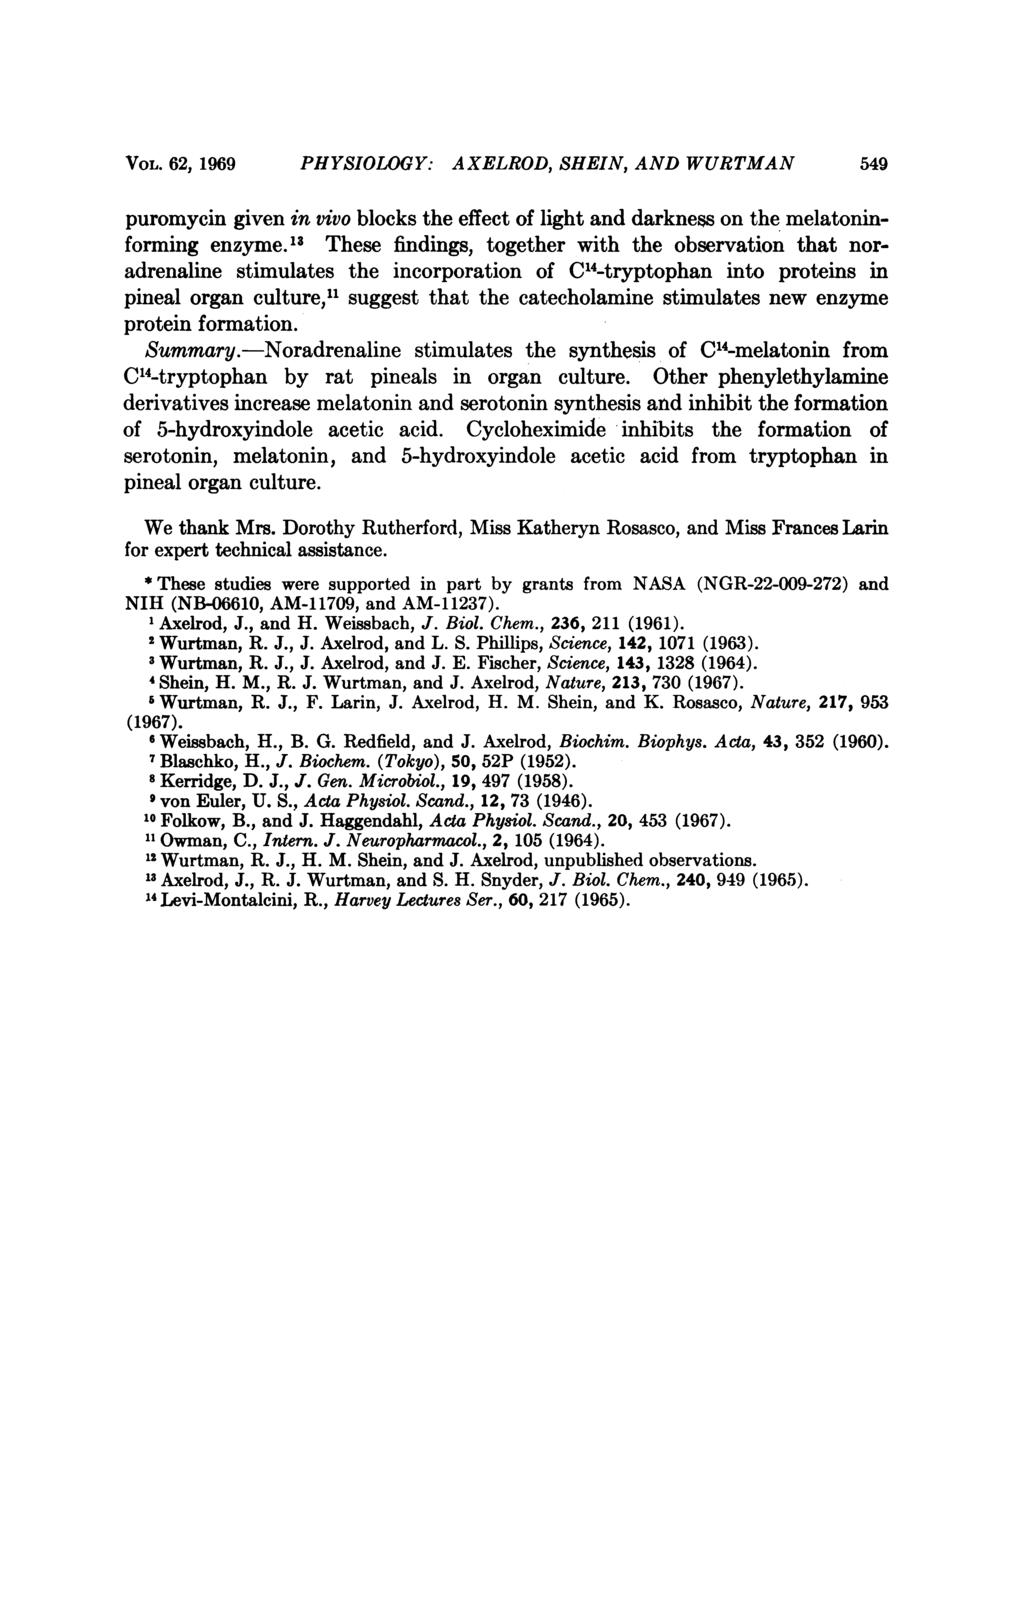 VOL. 62, 1969 PHYSIOLOGY: AXELROD, SHEIN, AND WURTMAN 549 puromycin given in vivo blocks the effect of light and darkness on the melatoninforming enzyme.